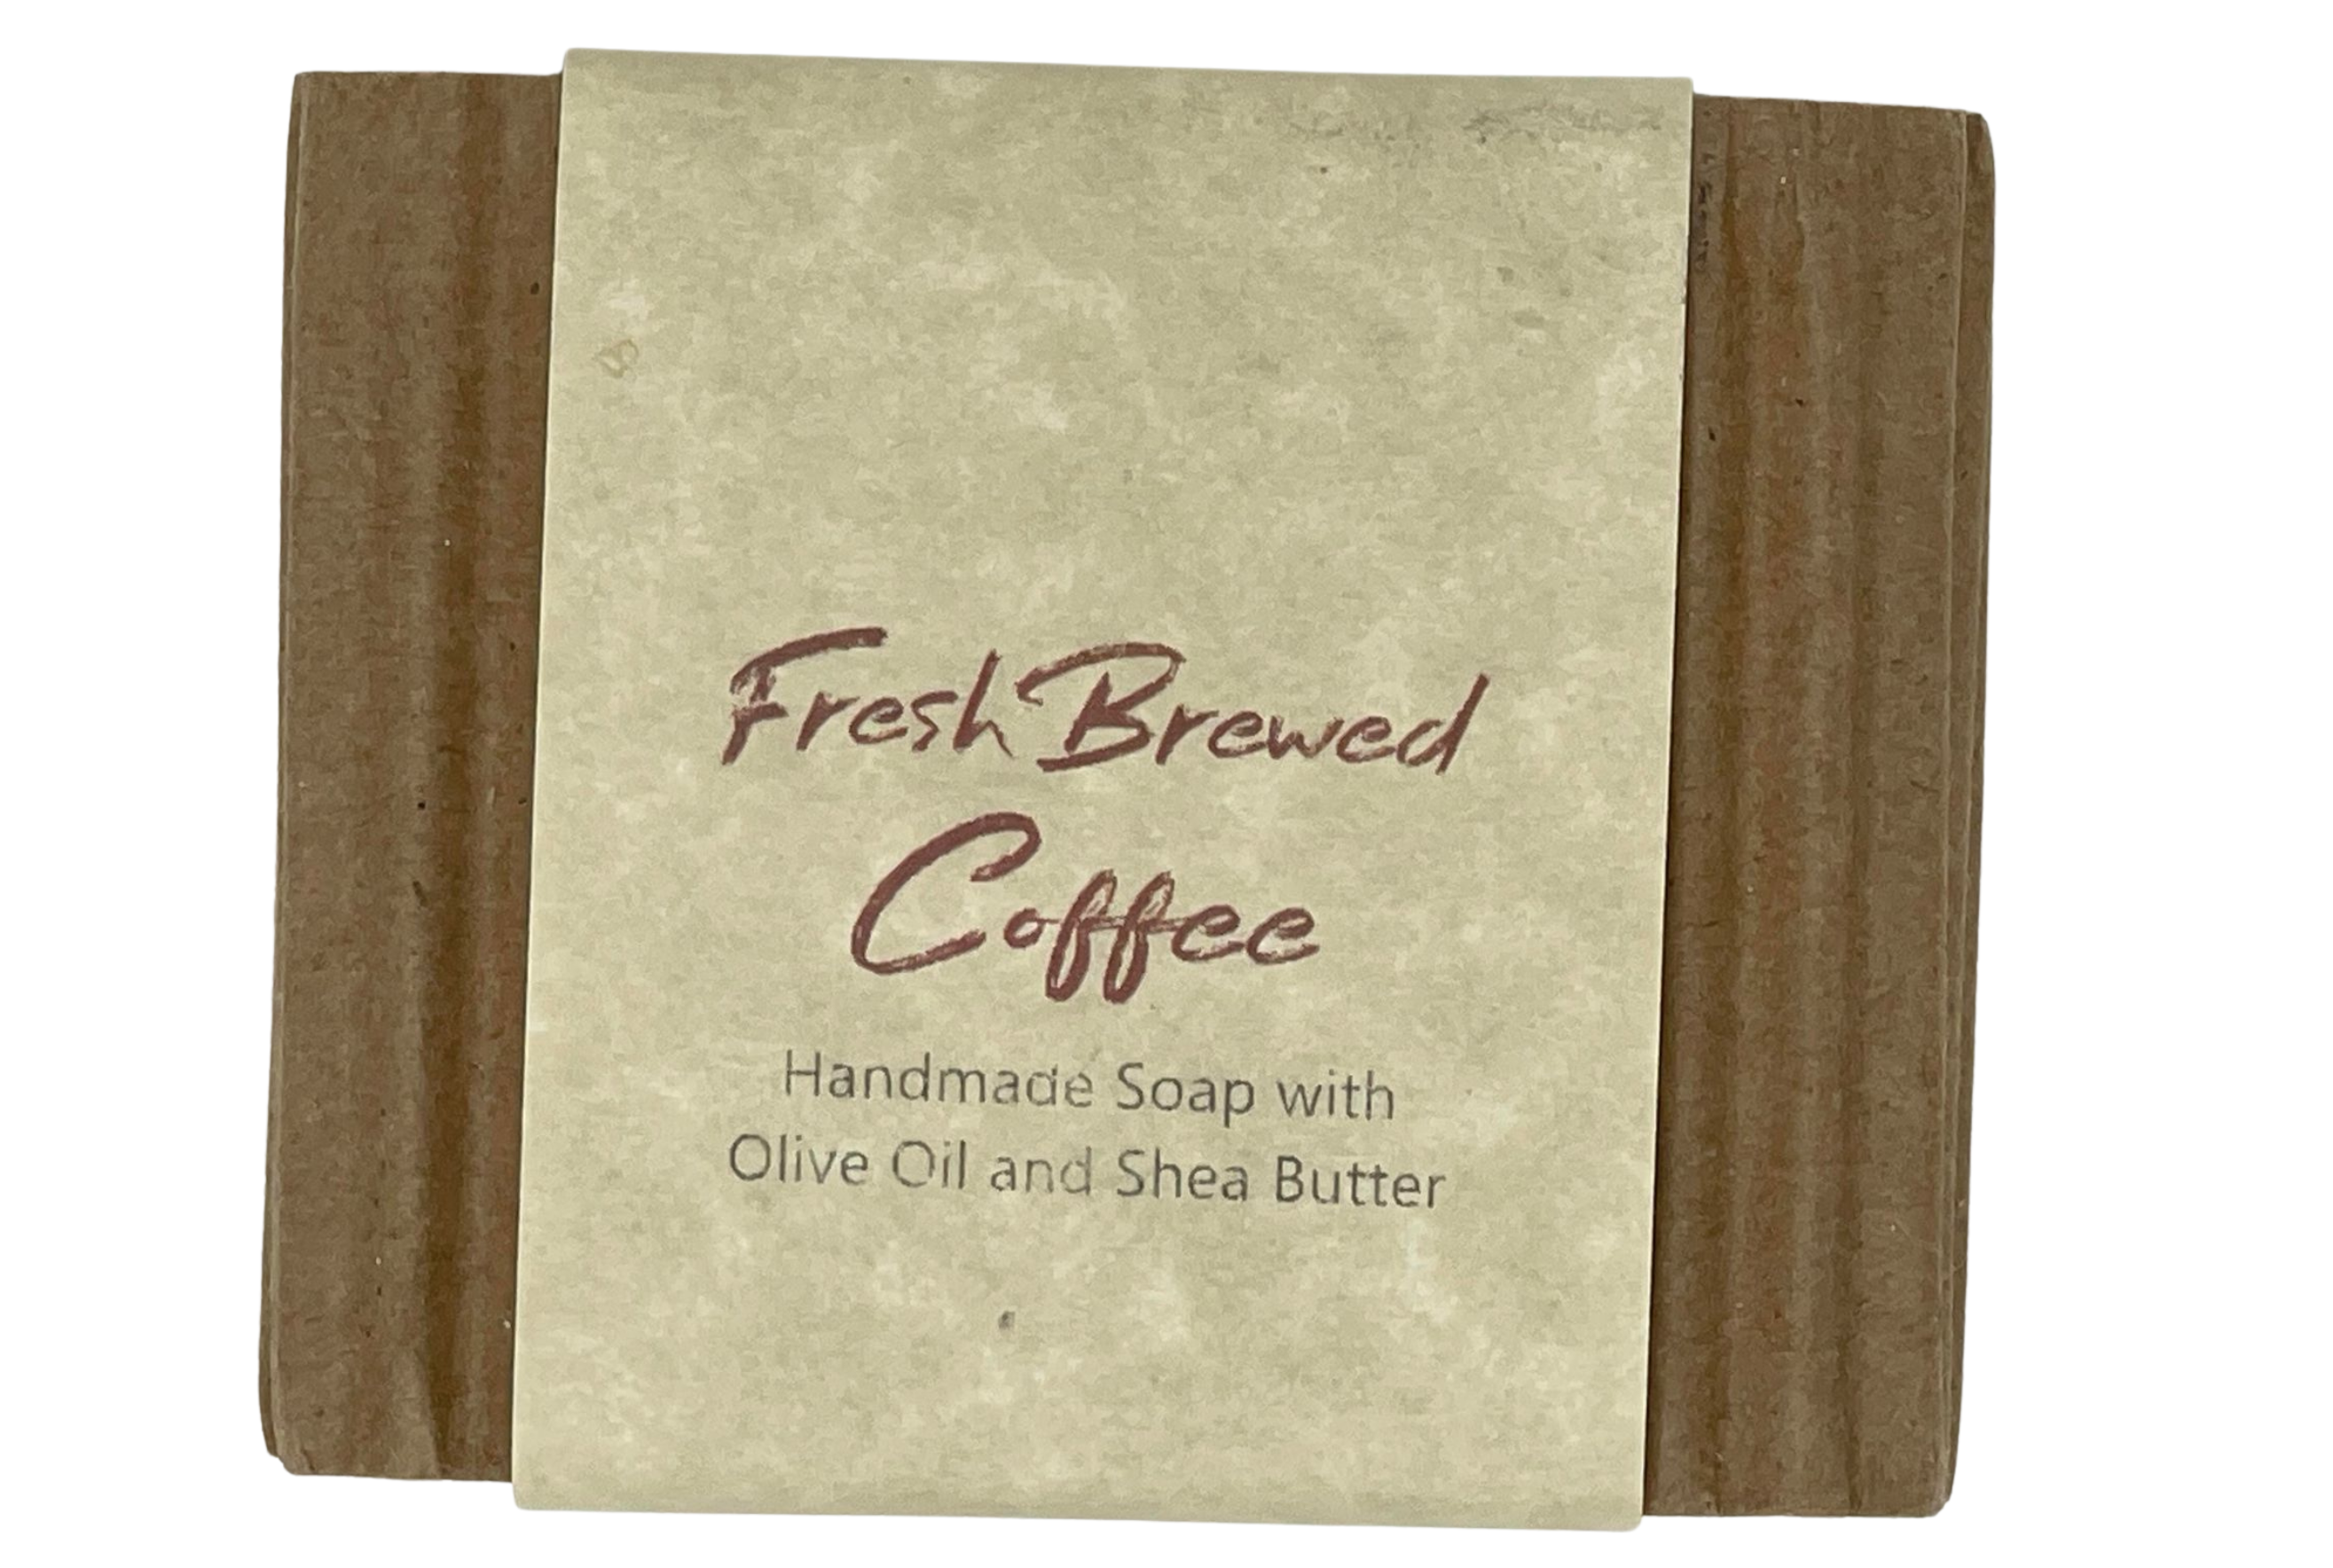 Fresh Brewed Coffee Goat Milk Handmade Soap Bar with Olive Oil & Shea Butter